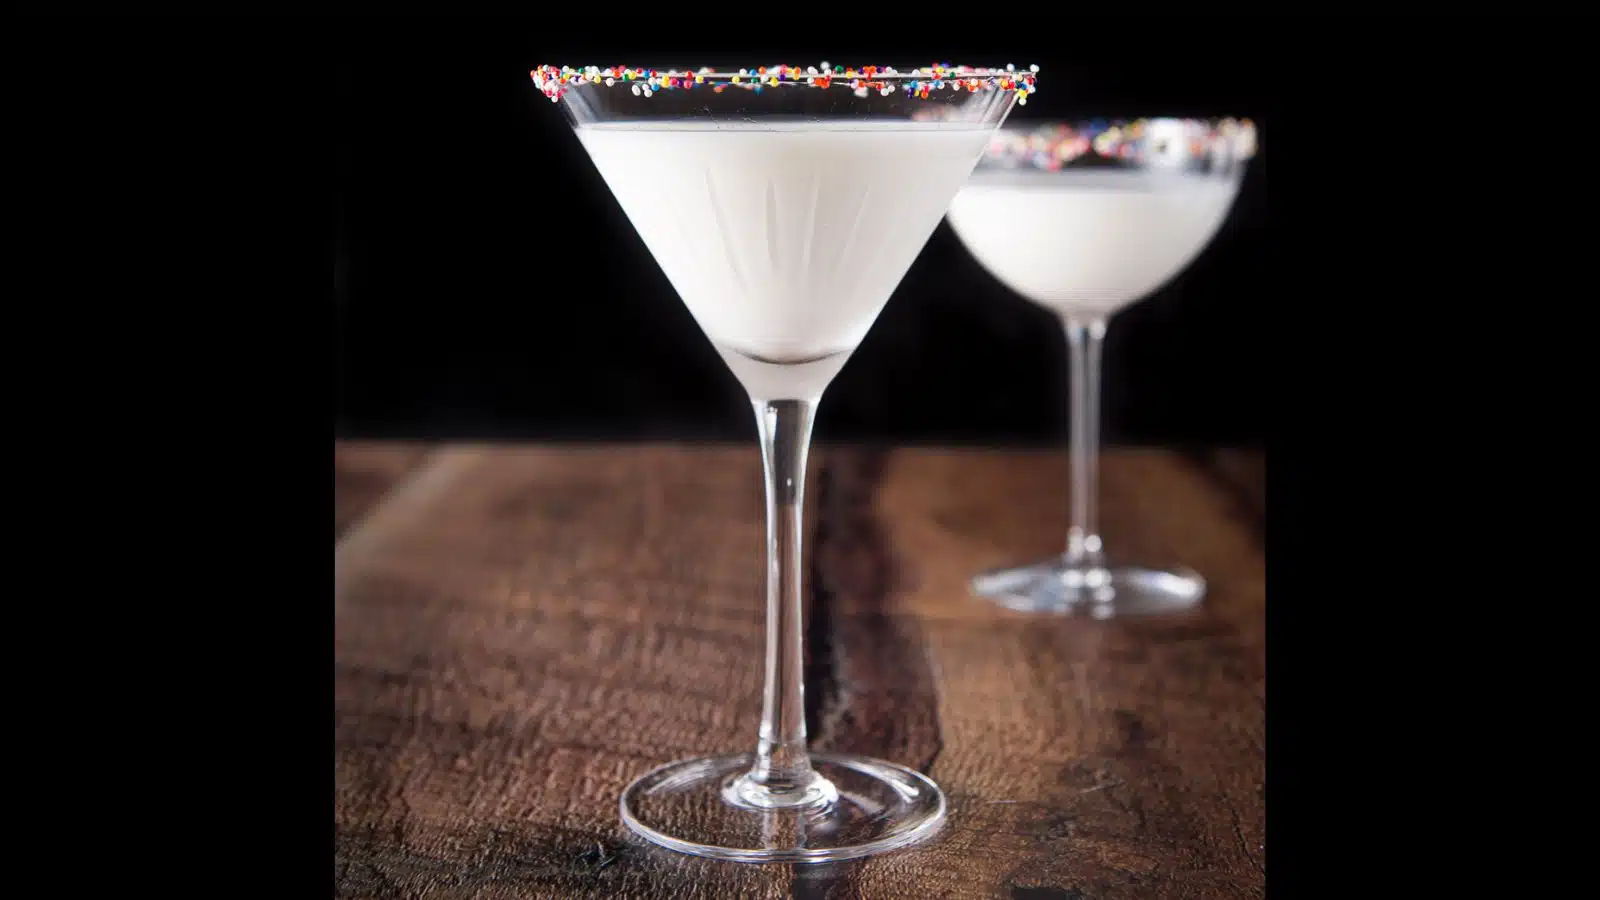 Two martini glasses with color balls on the rim filled with a white cocktail